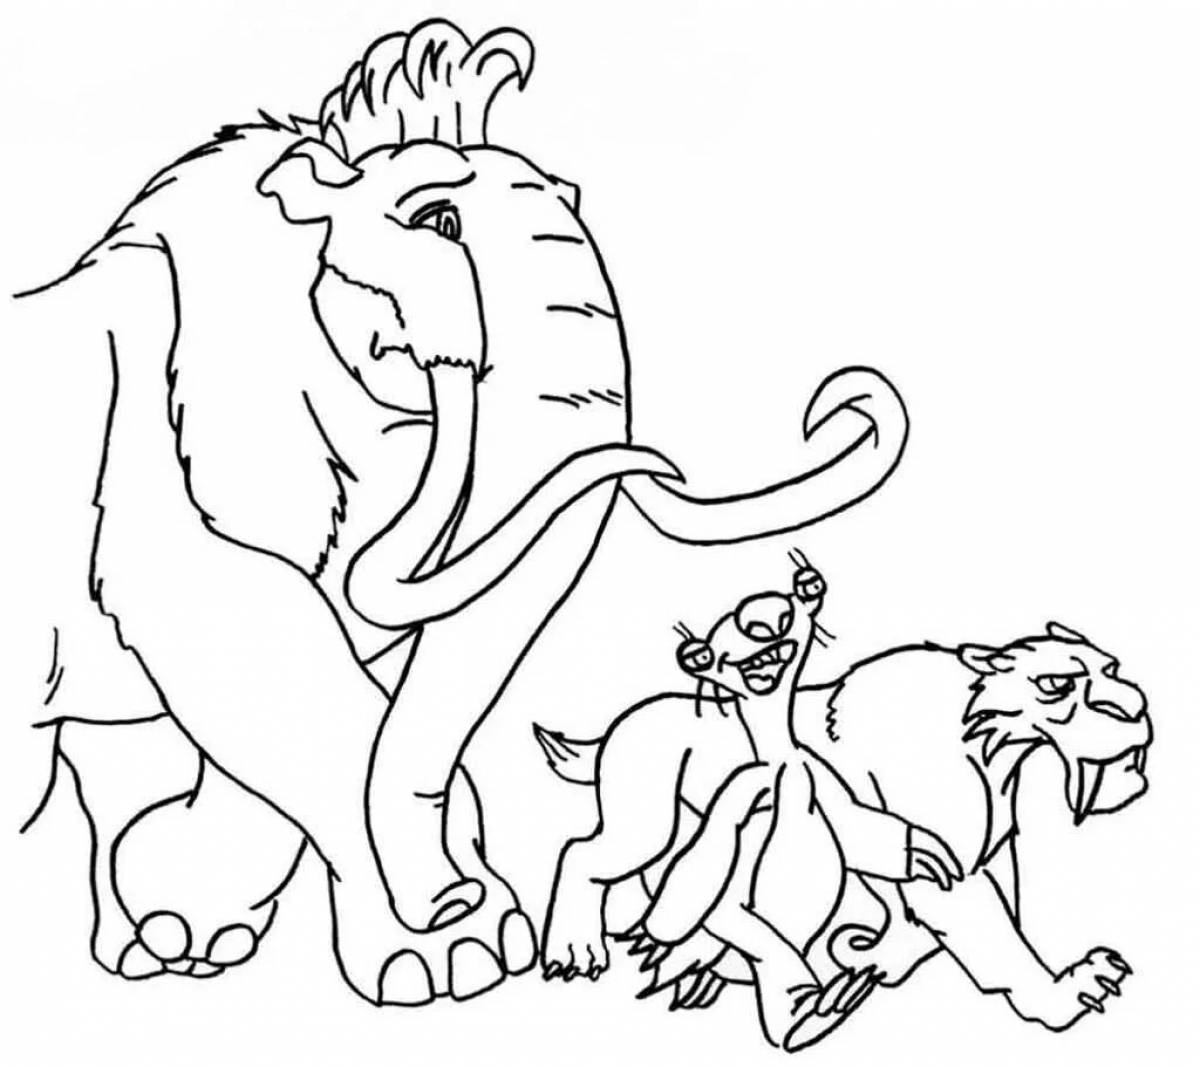 Coloring page festive diego ice age